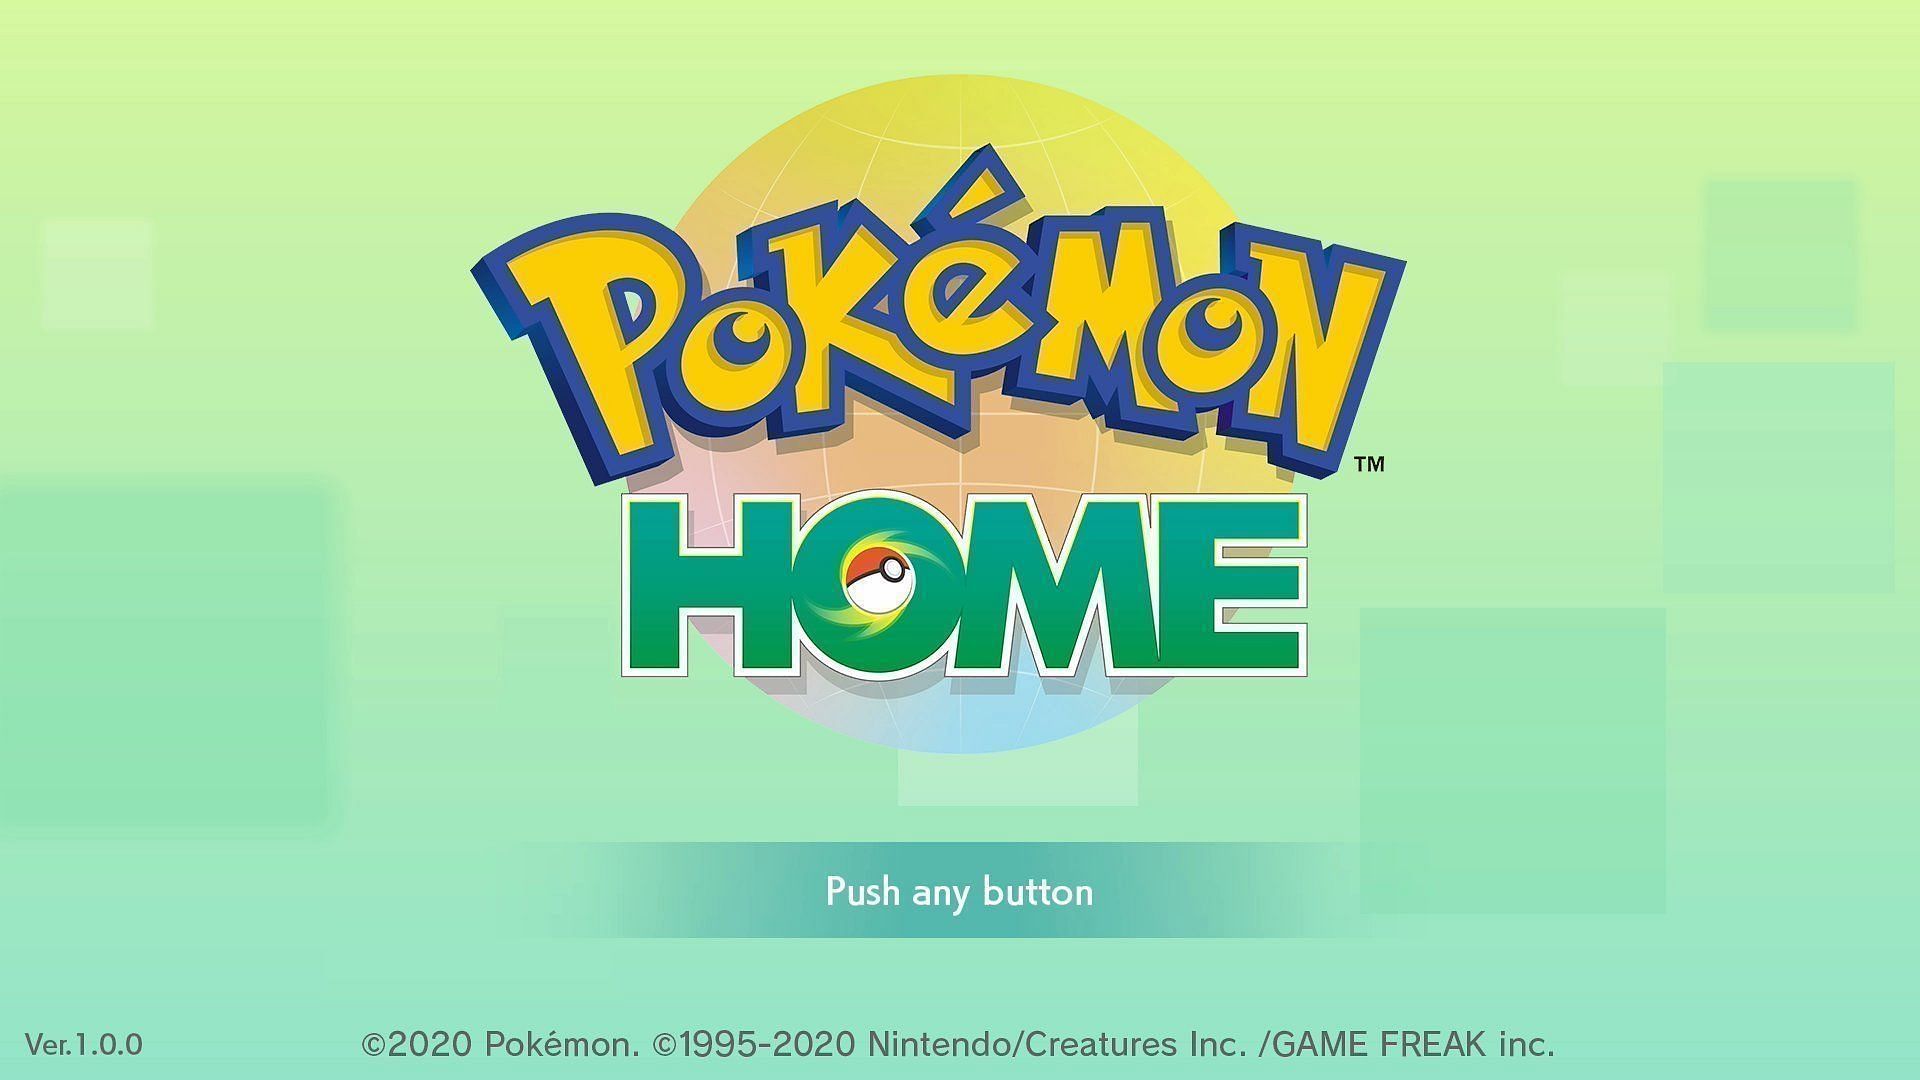 Pokemon Home is bringing an option to view Scarlet and Violet